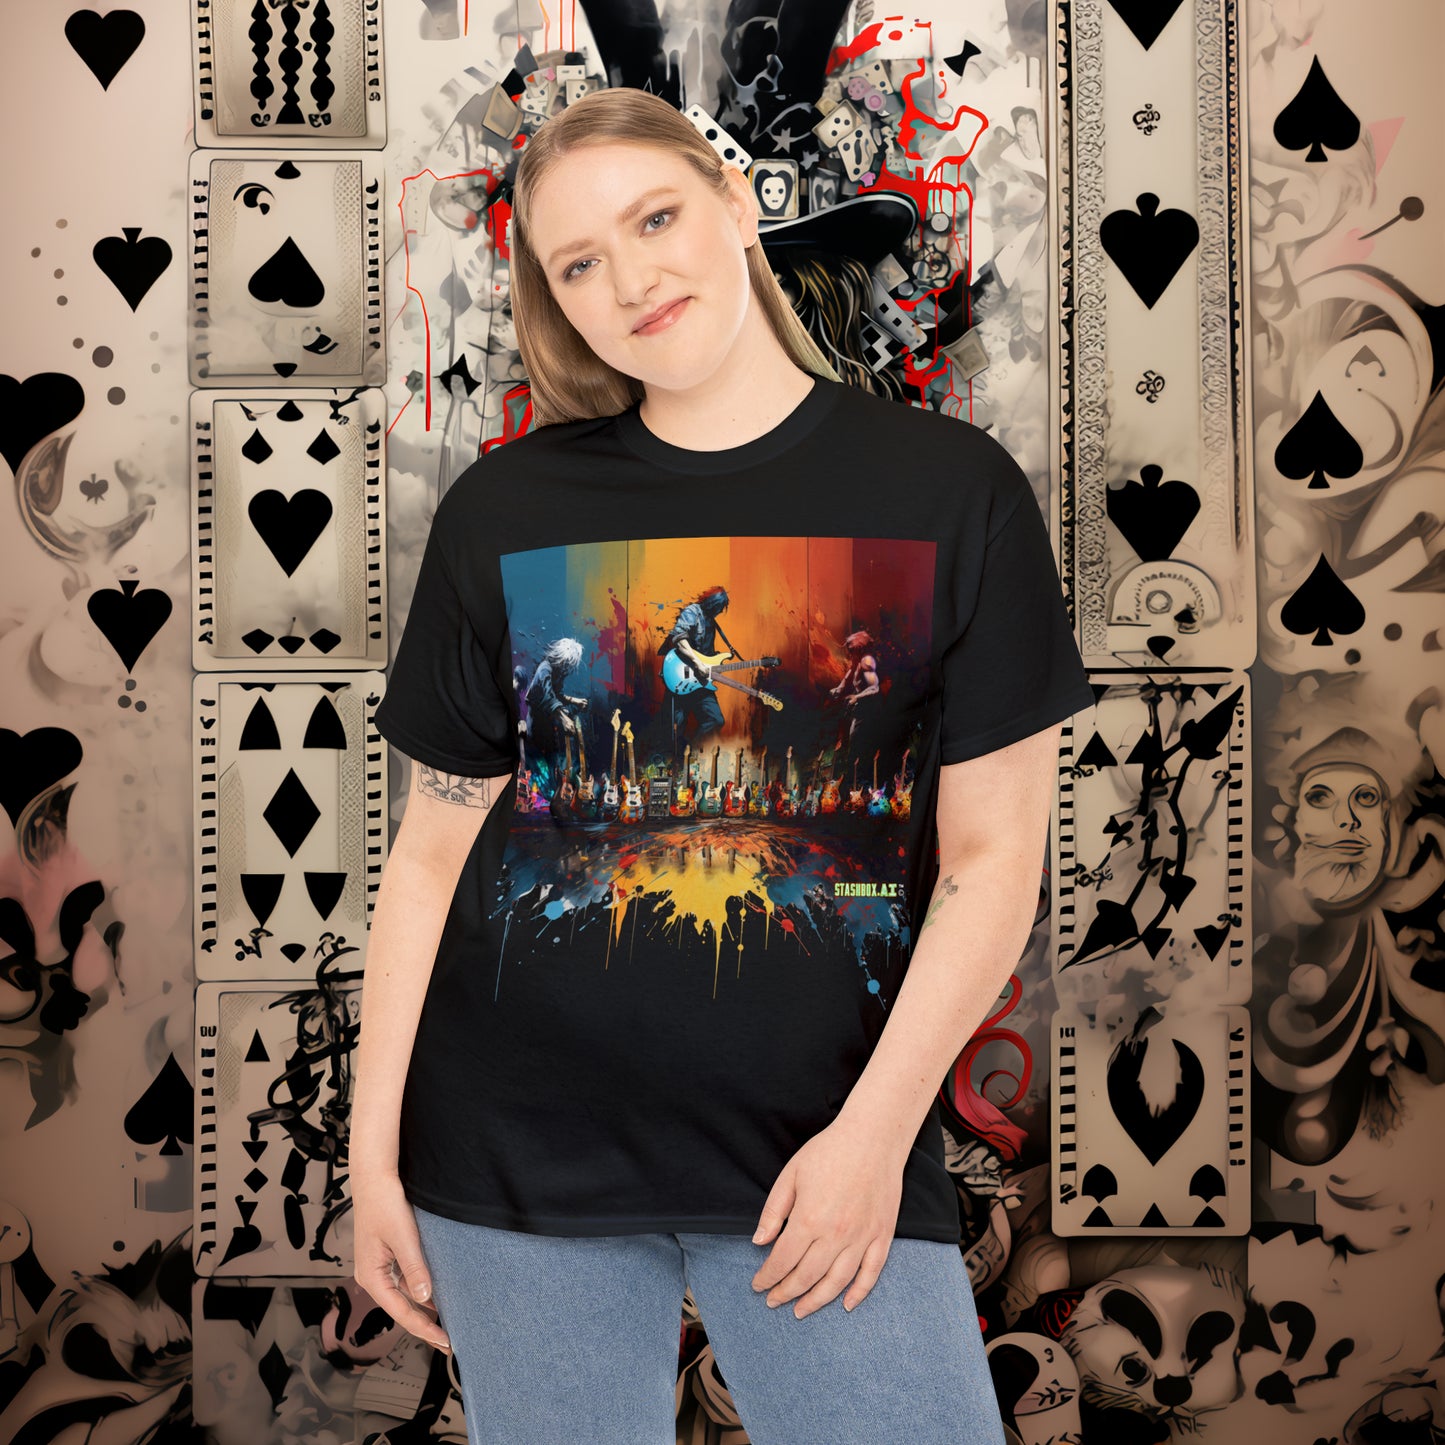 Unisex Adult Size Heavy Cotton TShirt - Colorful Abstract Guitars Design 005